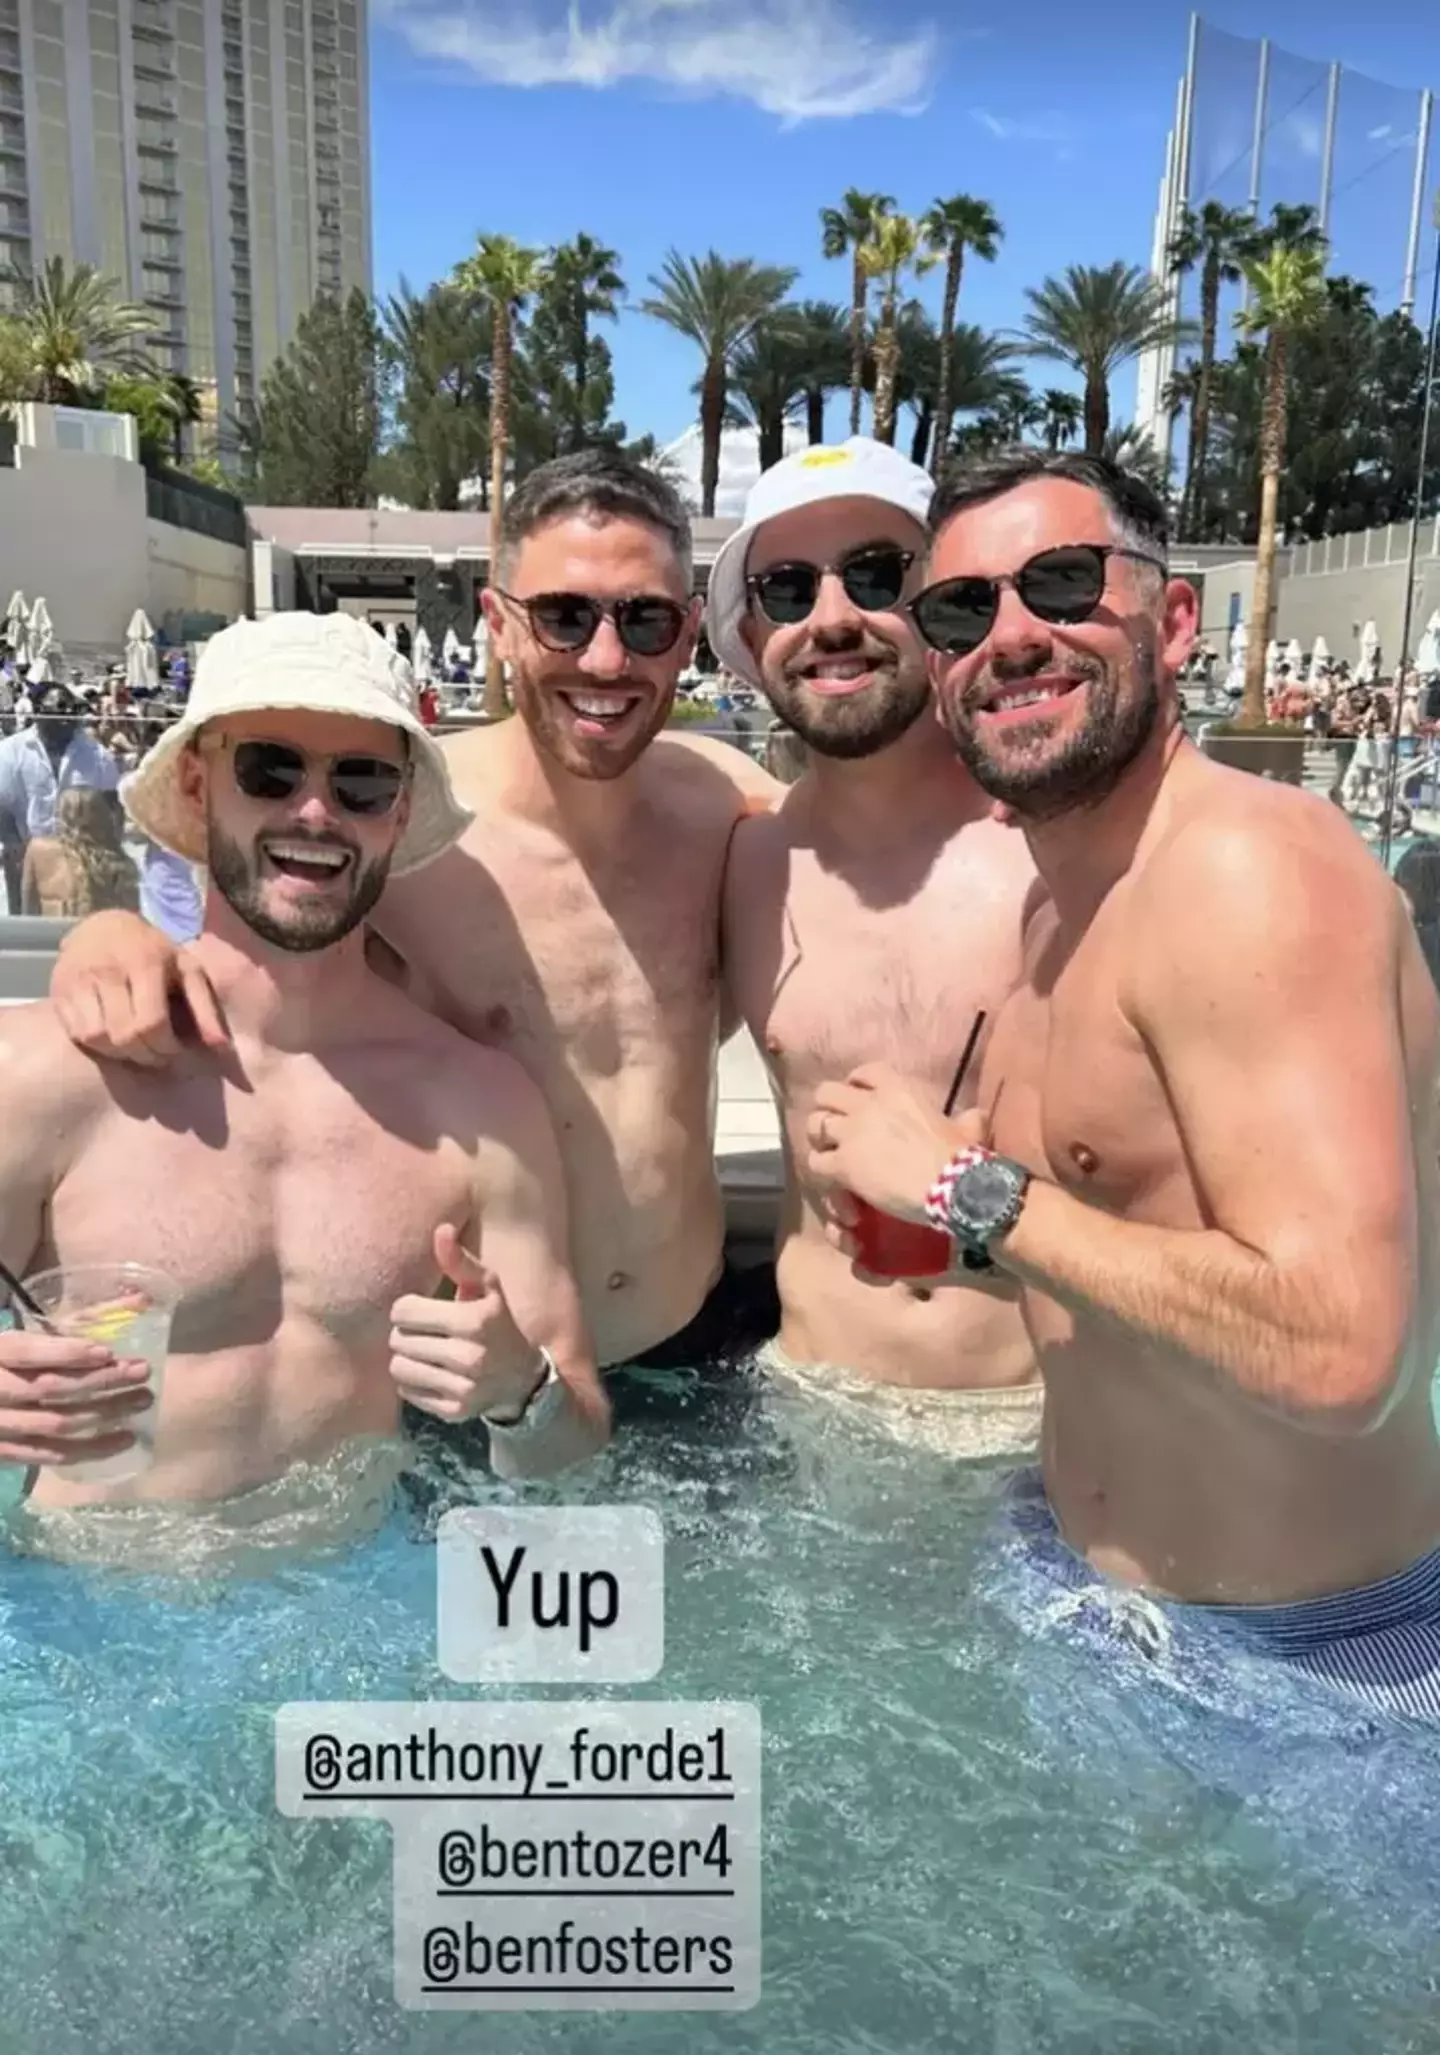 The gang have been enjoying their time in Las Vegas.